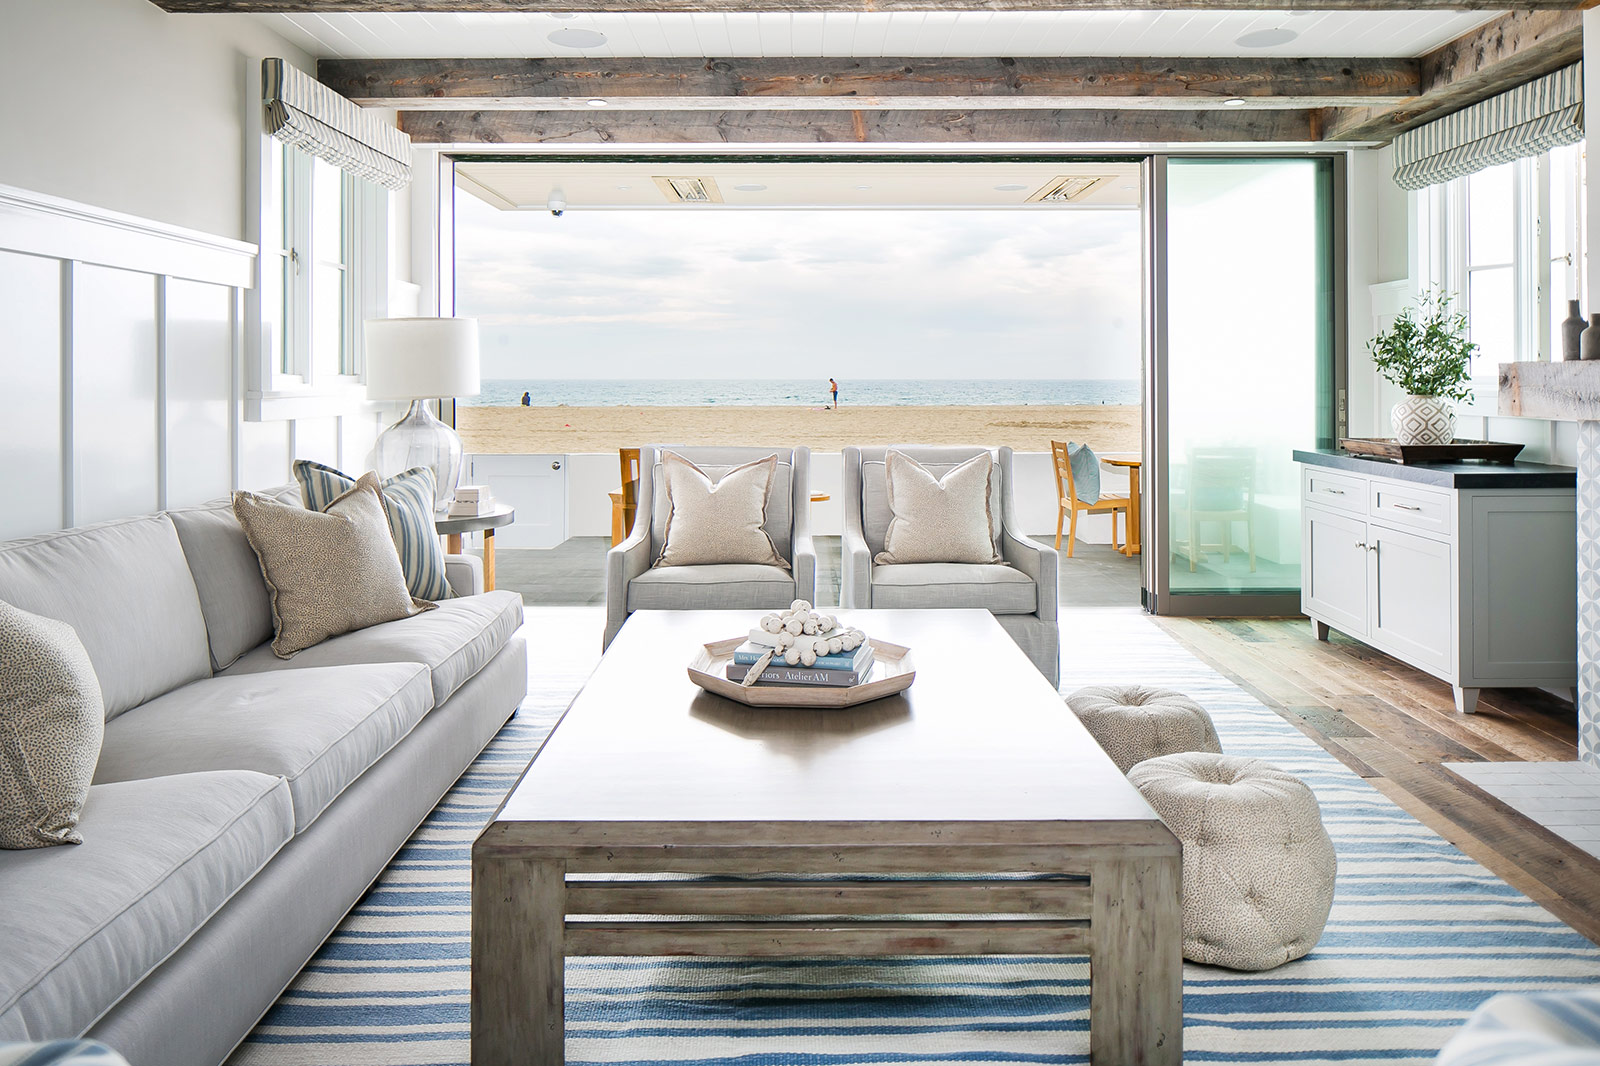 Brooke Wagner Design | House of Turquoise